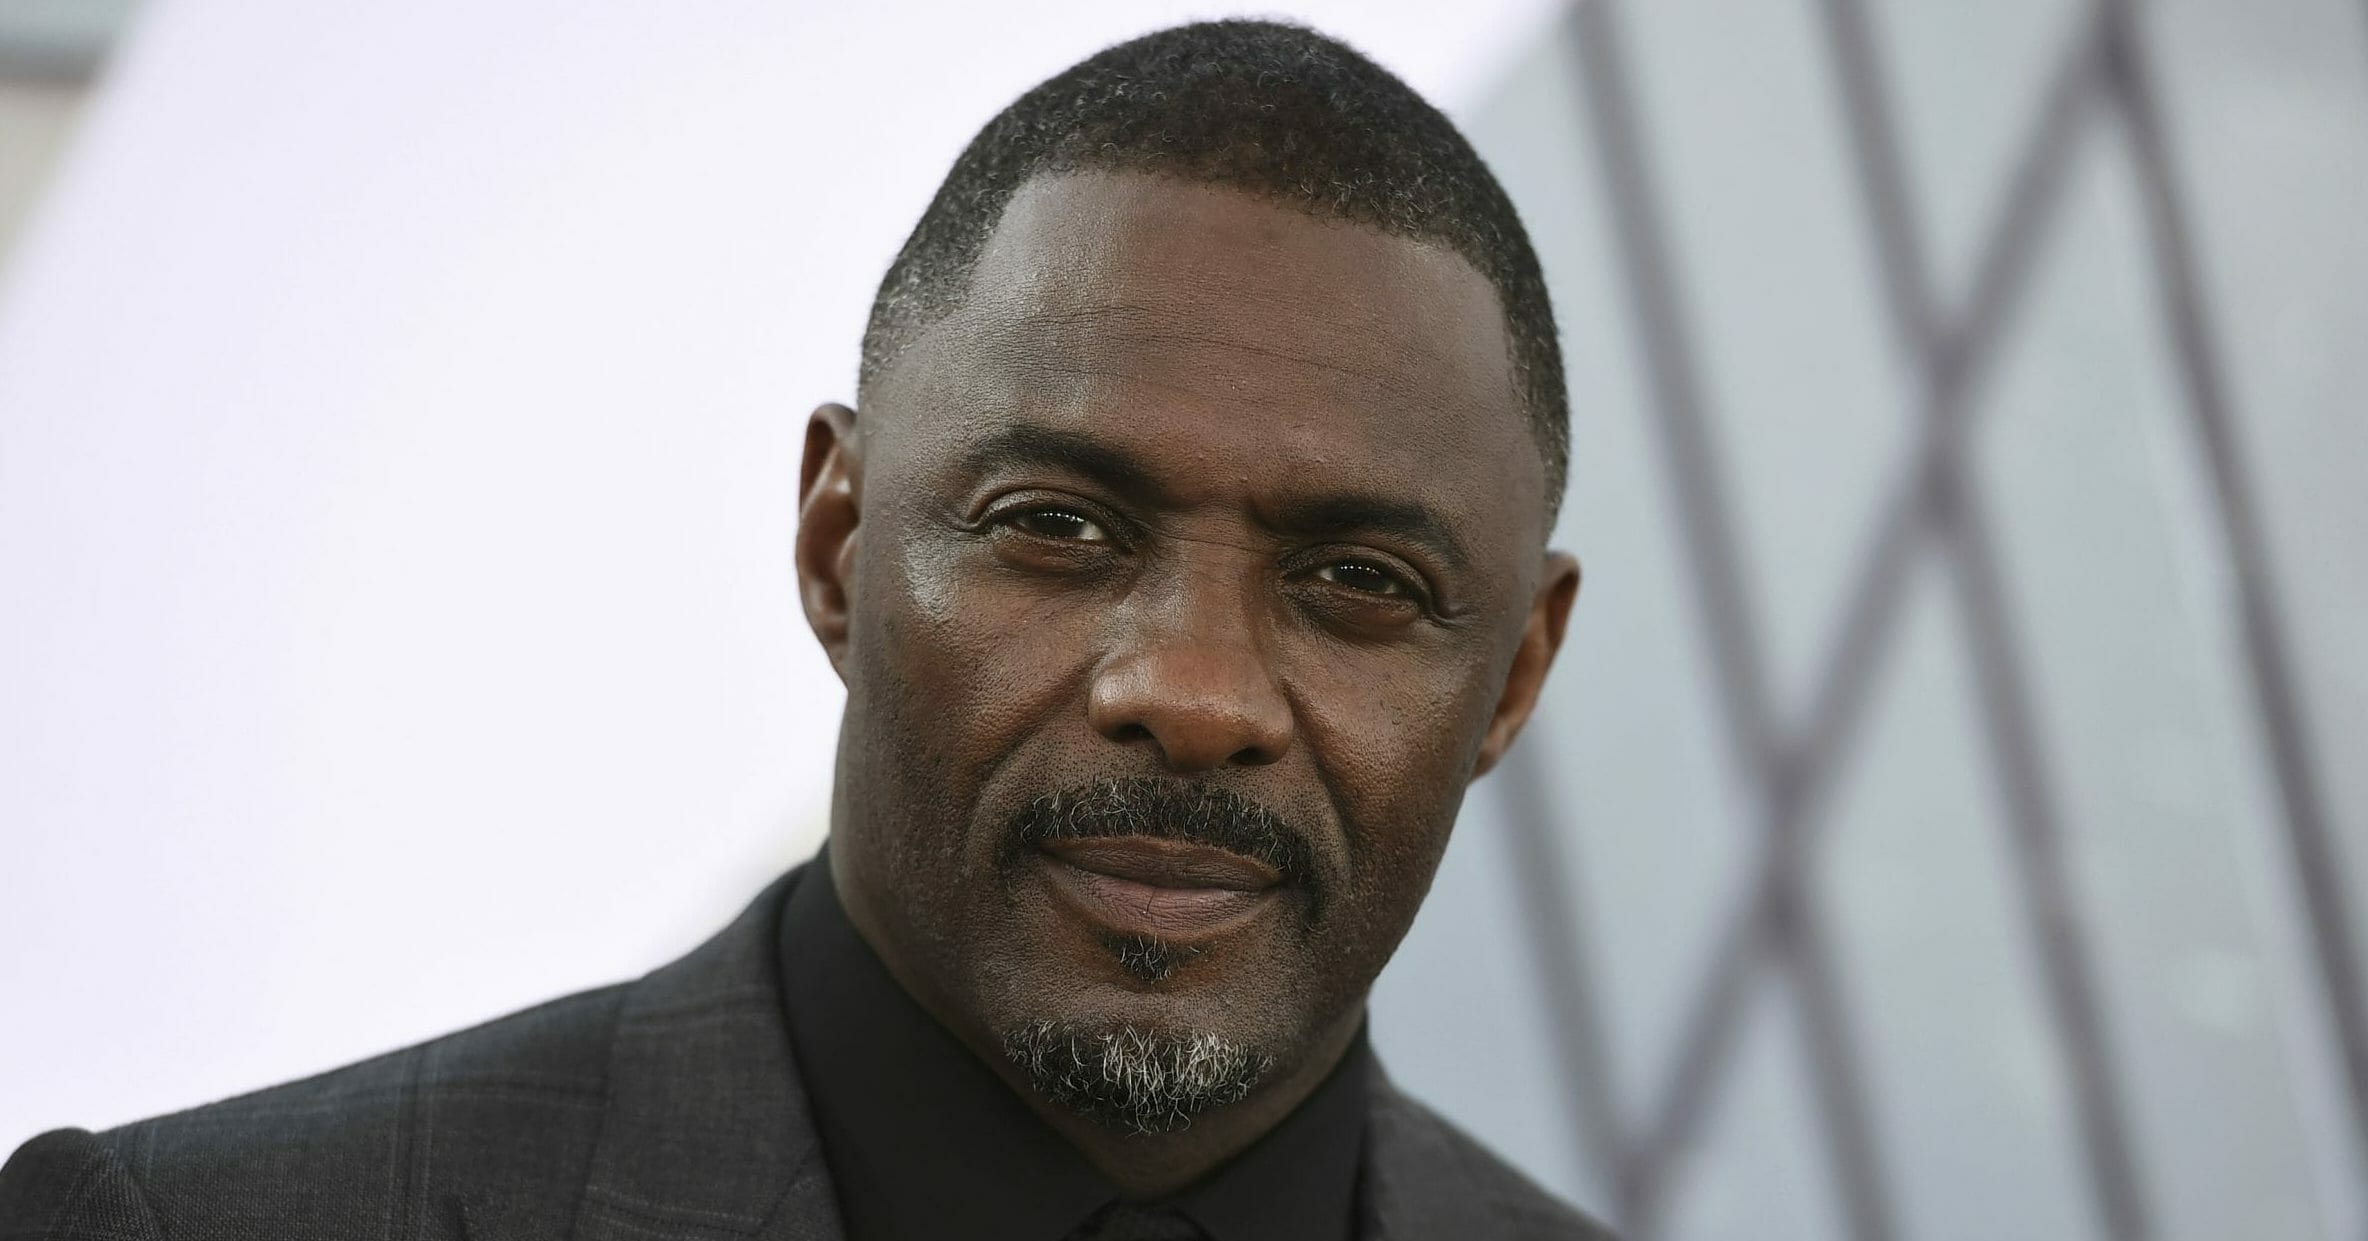 Actor Idris Elba announced March 16, 2020, that he has tested positive for the coronavirus but has shown no symptoms yet.